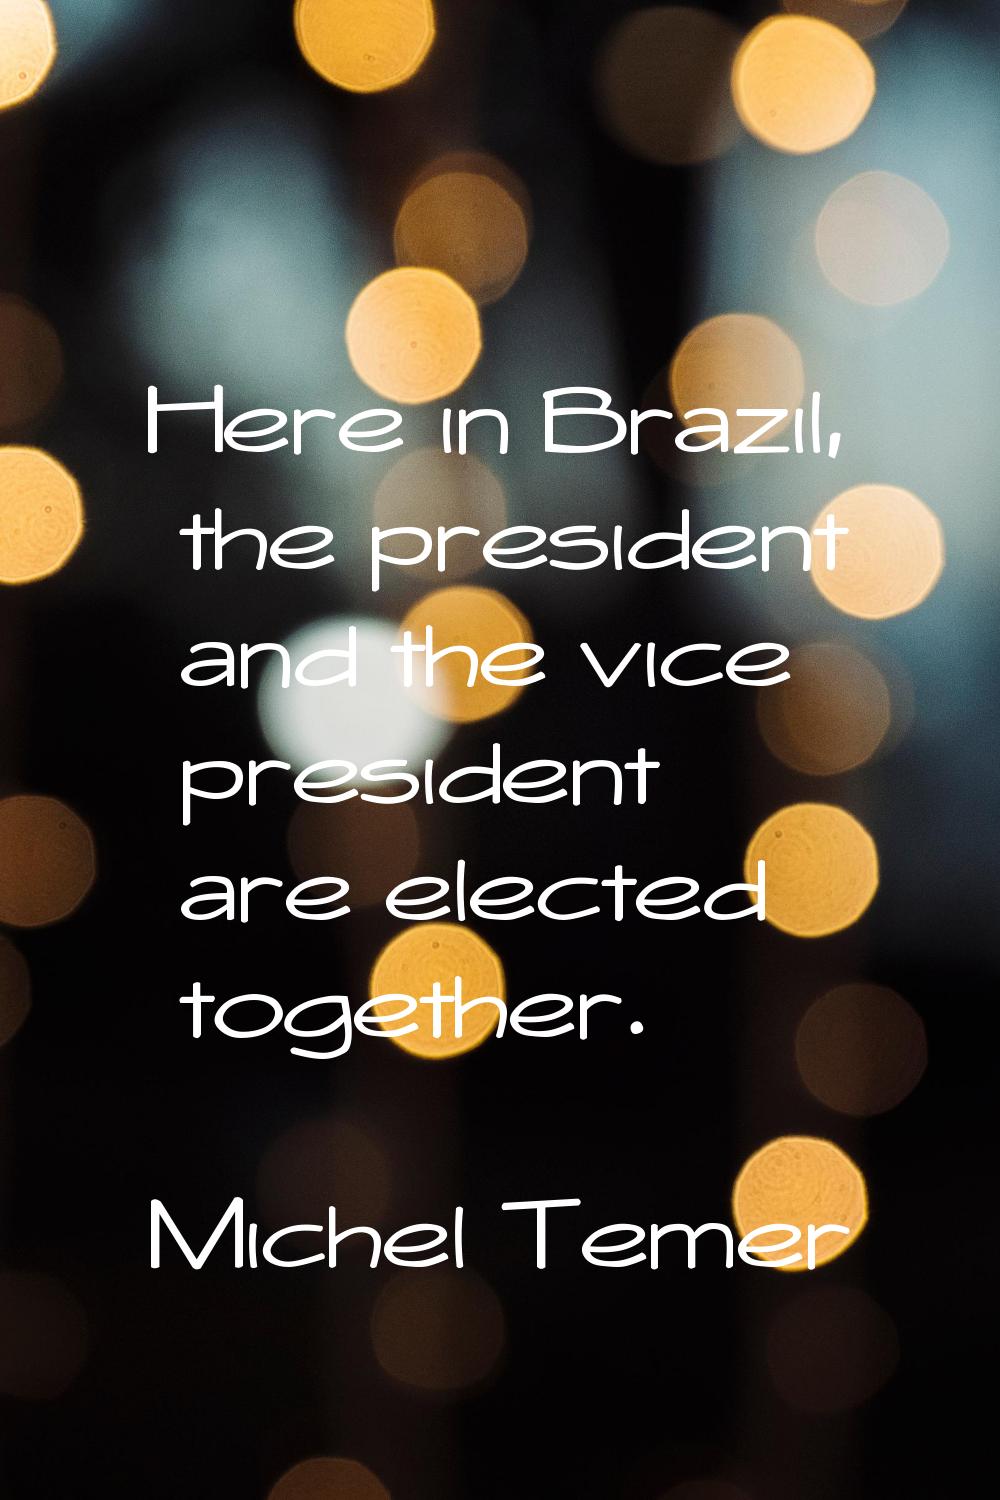 Here in Brazil, the president and the vice president are elected together.